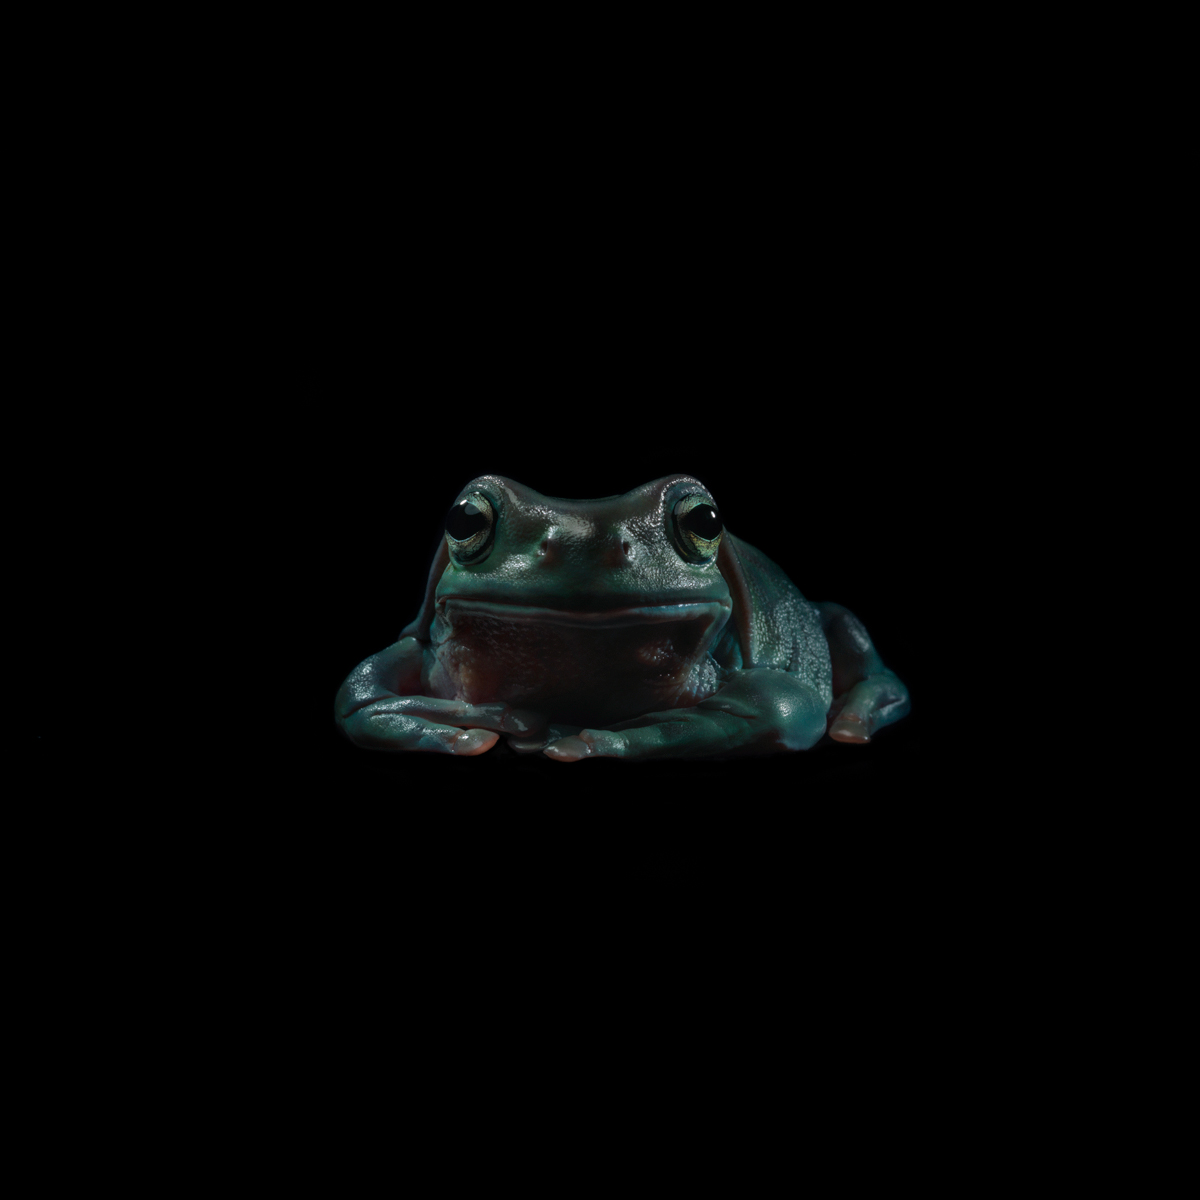 F is Frog